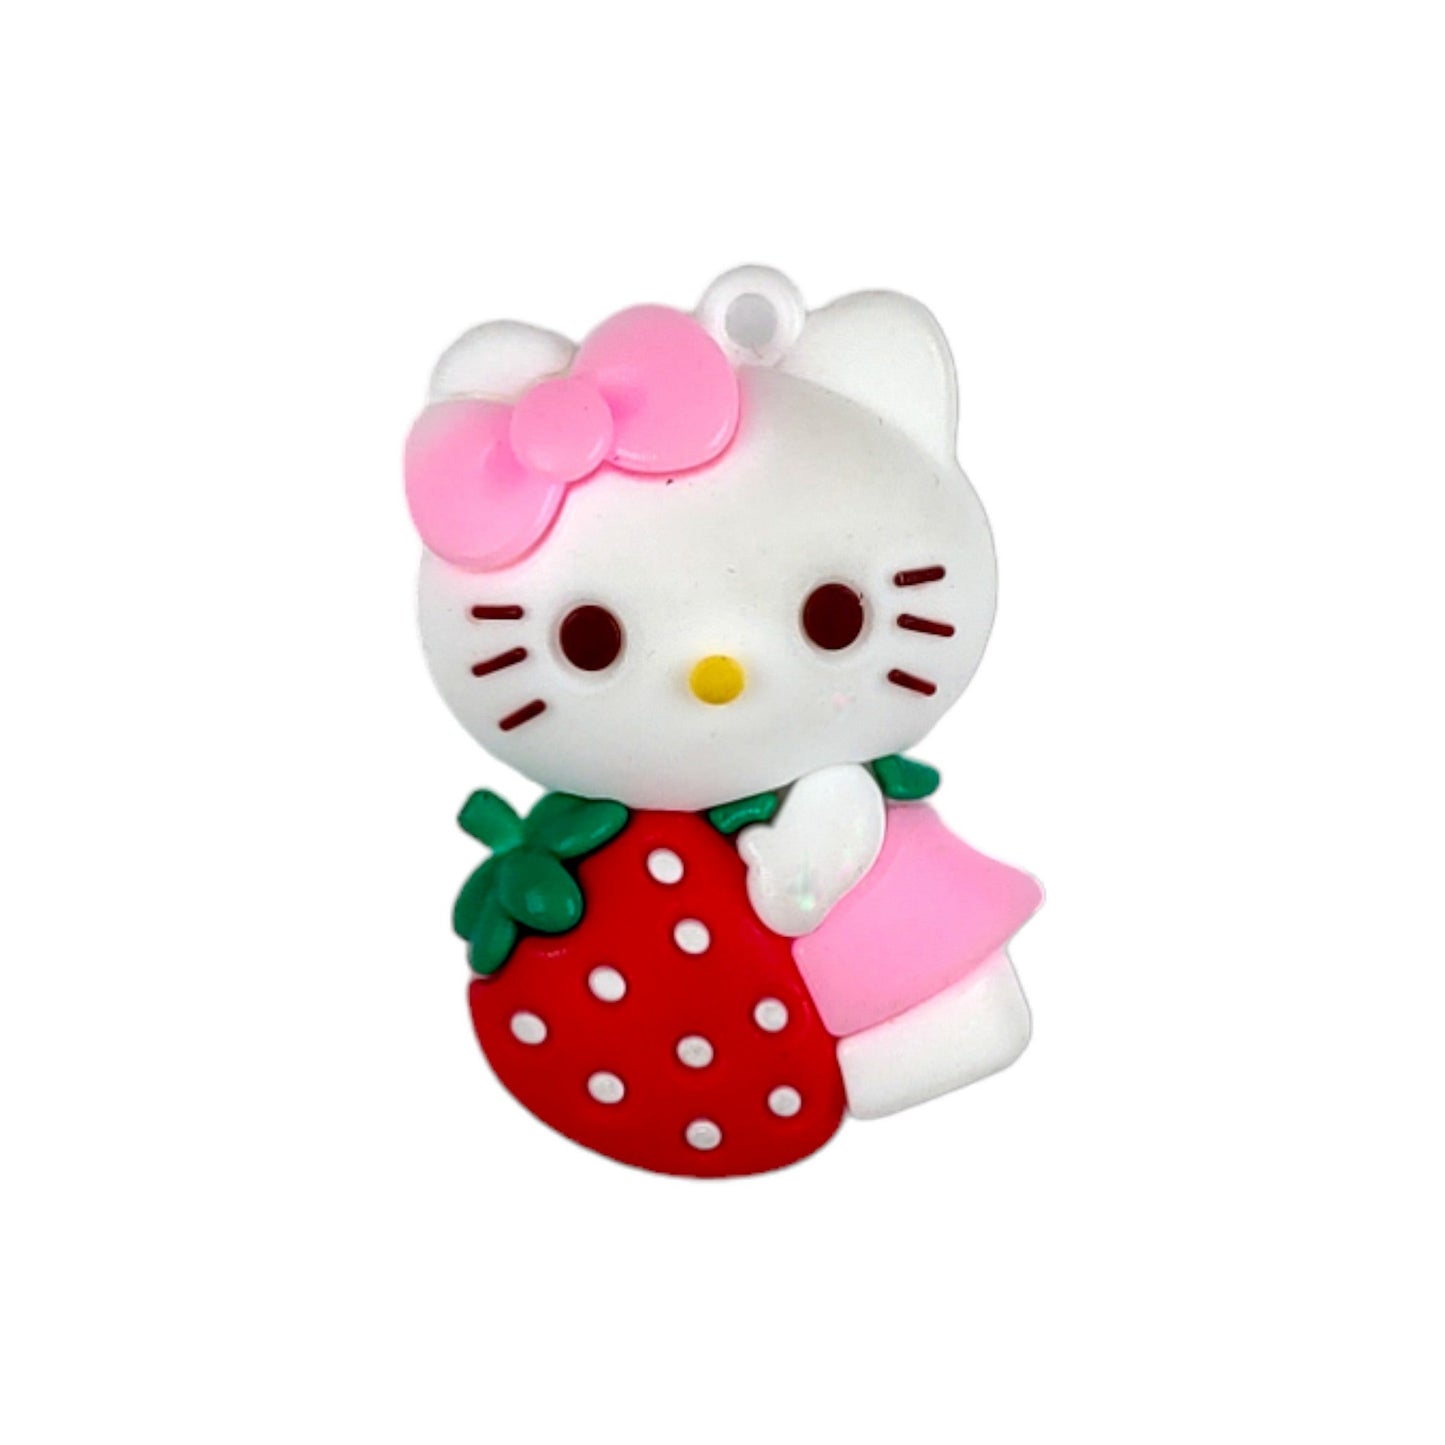 Cute Kity Cat Doll Resin Motif For Craft Design Or Decoration, 25 Pcs,Pink-13524